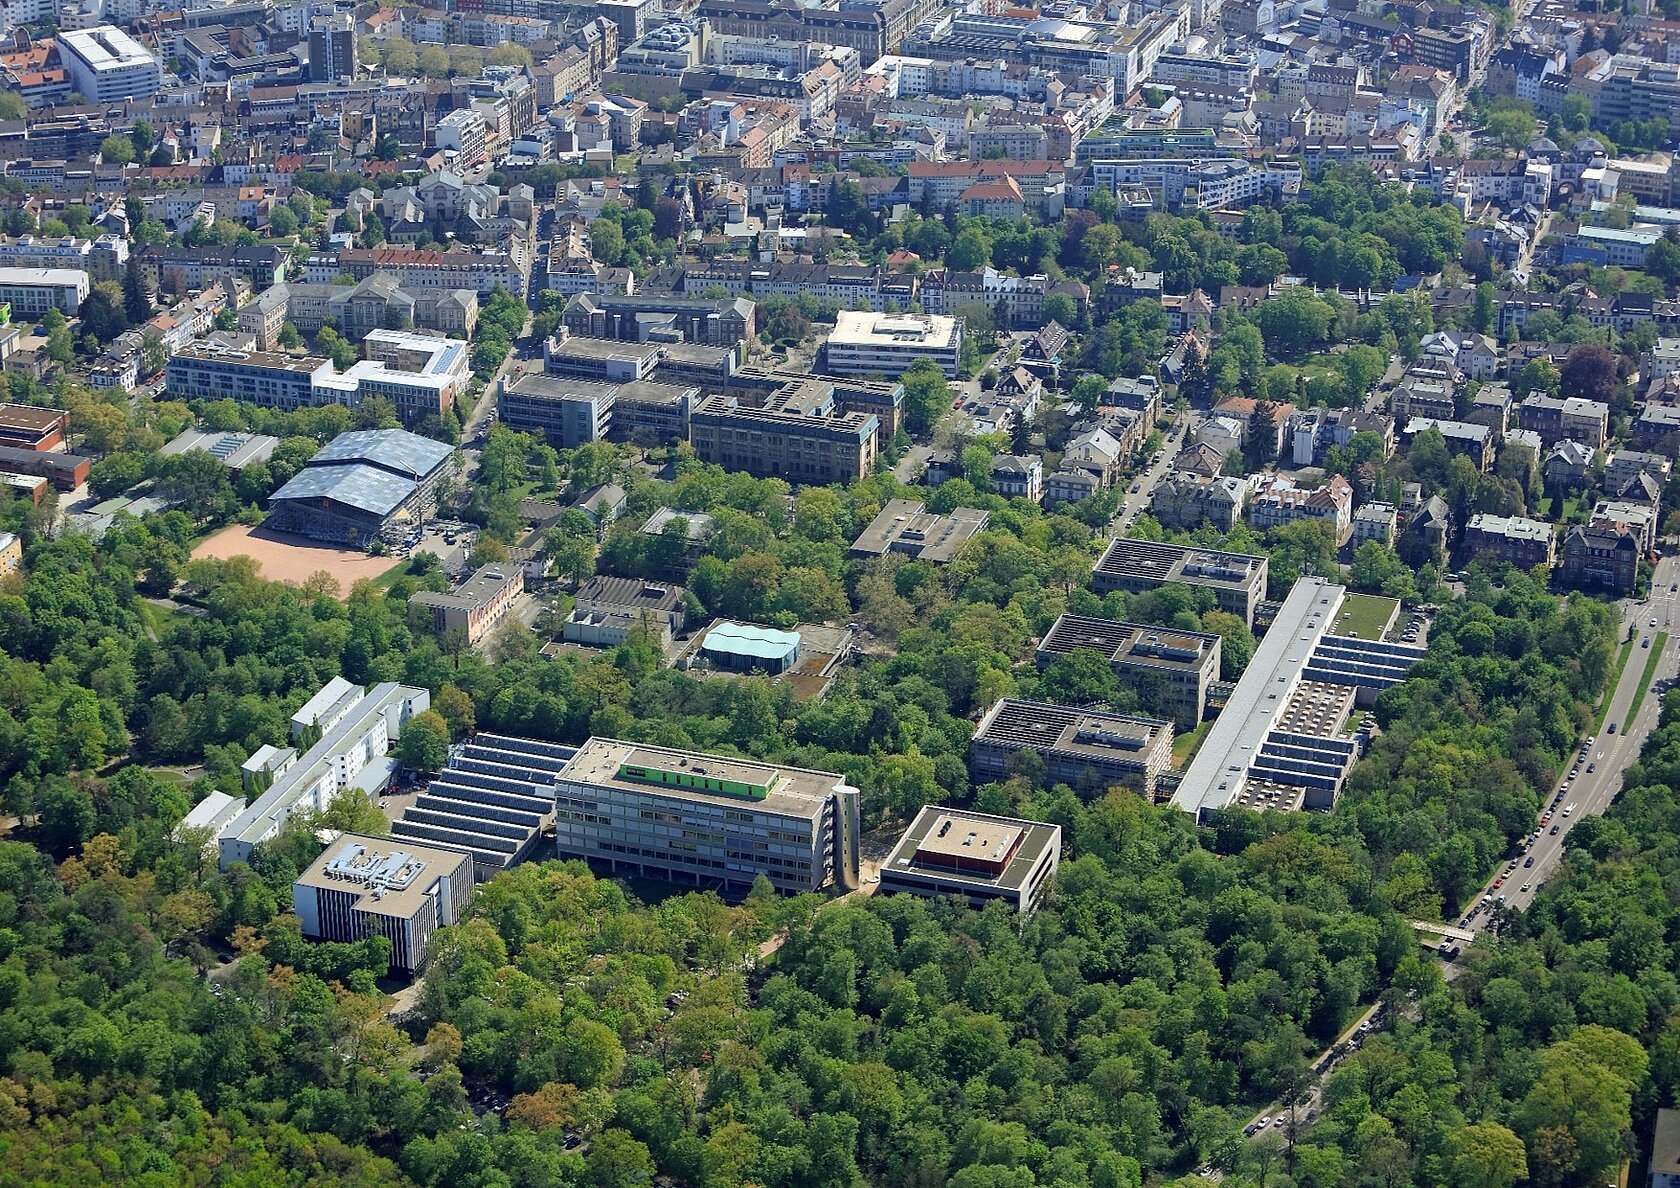 Aerial view showing the campus surrounded by trees